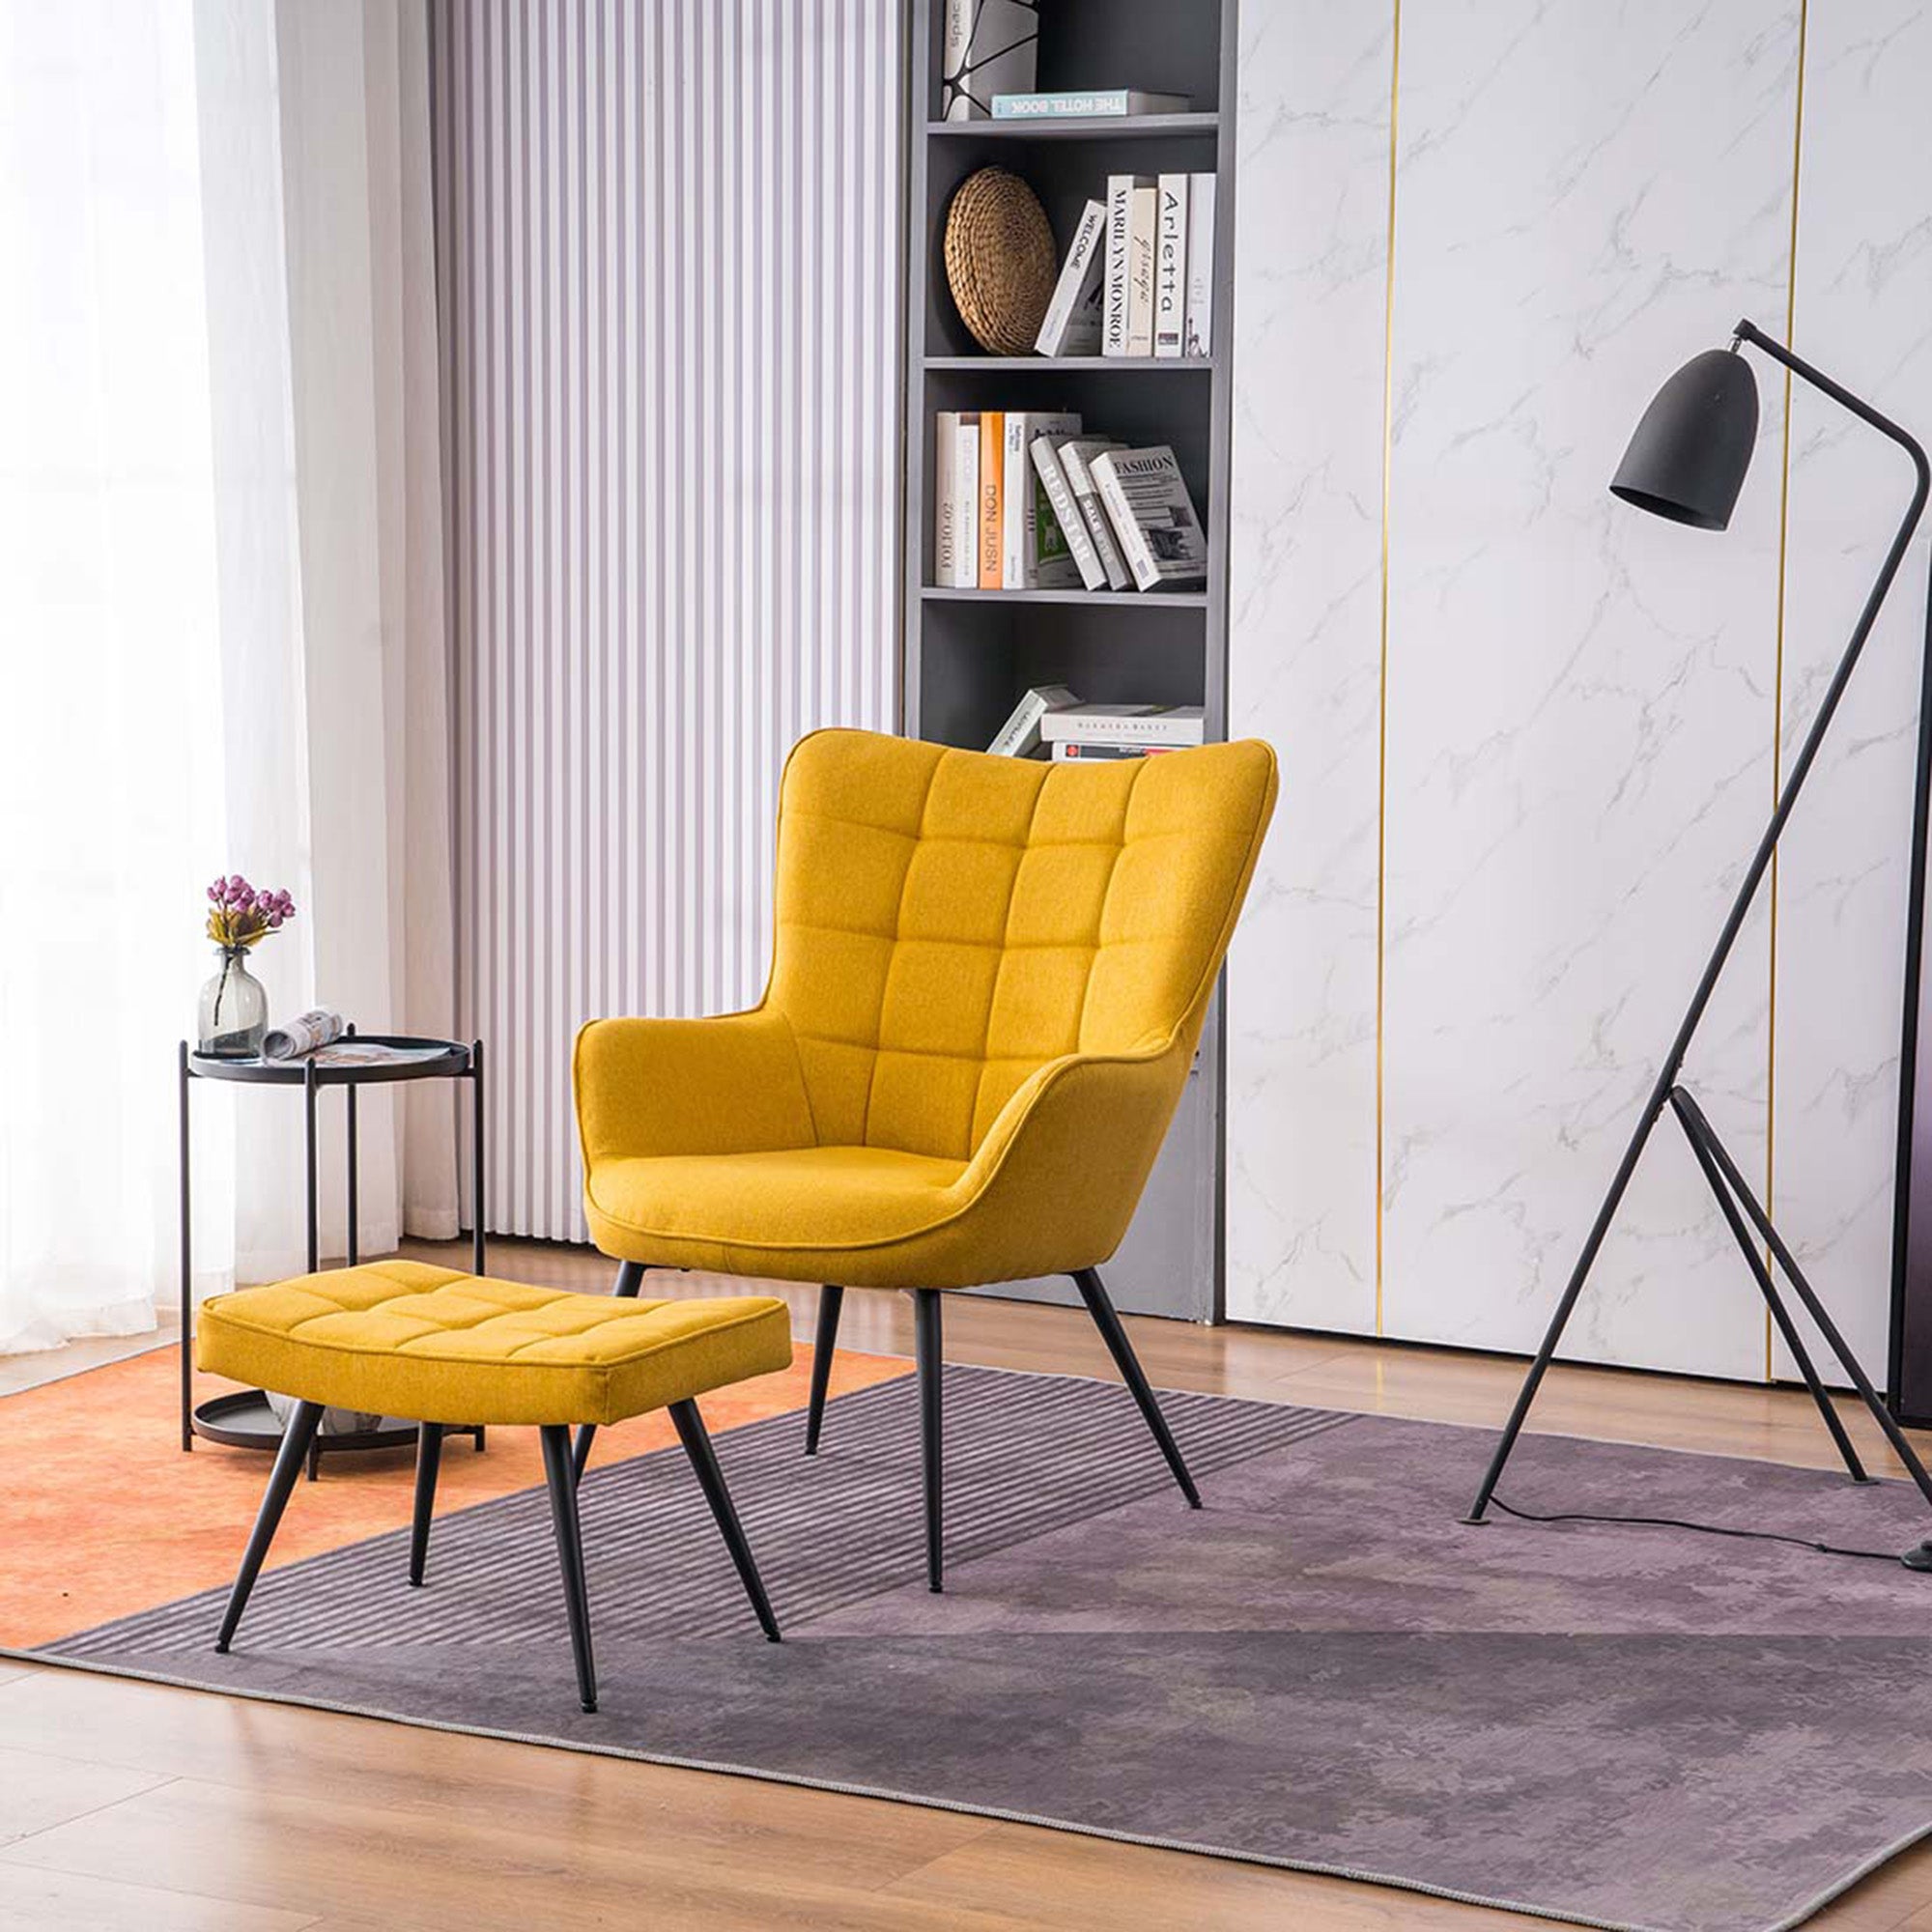  Meet Vera: the accent chair you can’t live without 